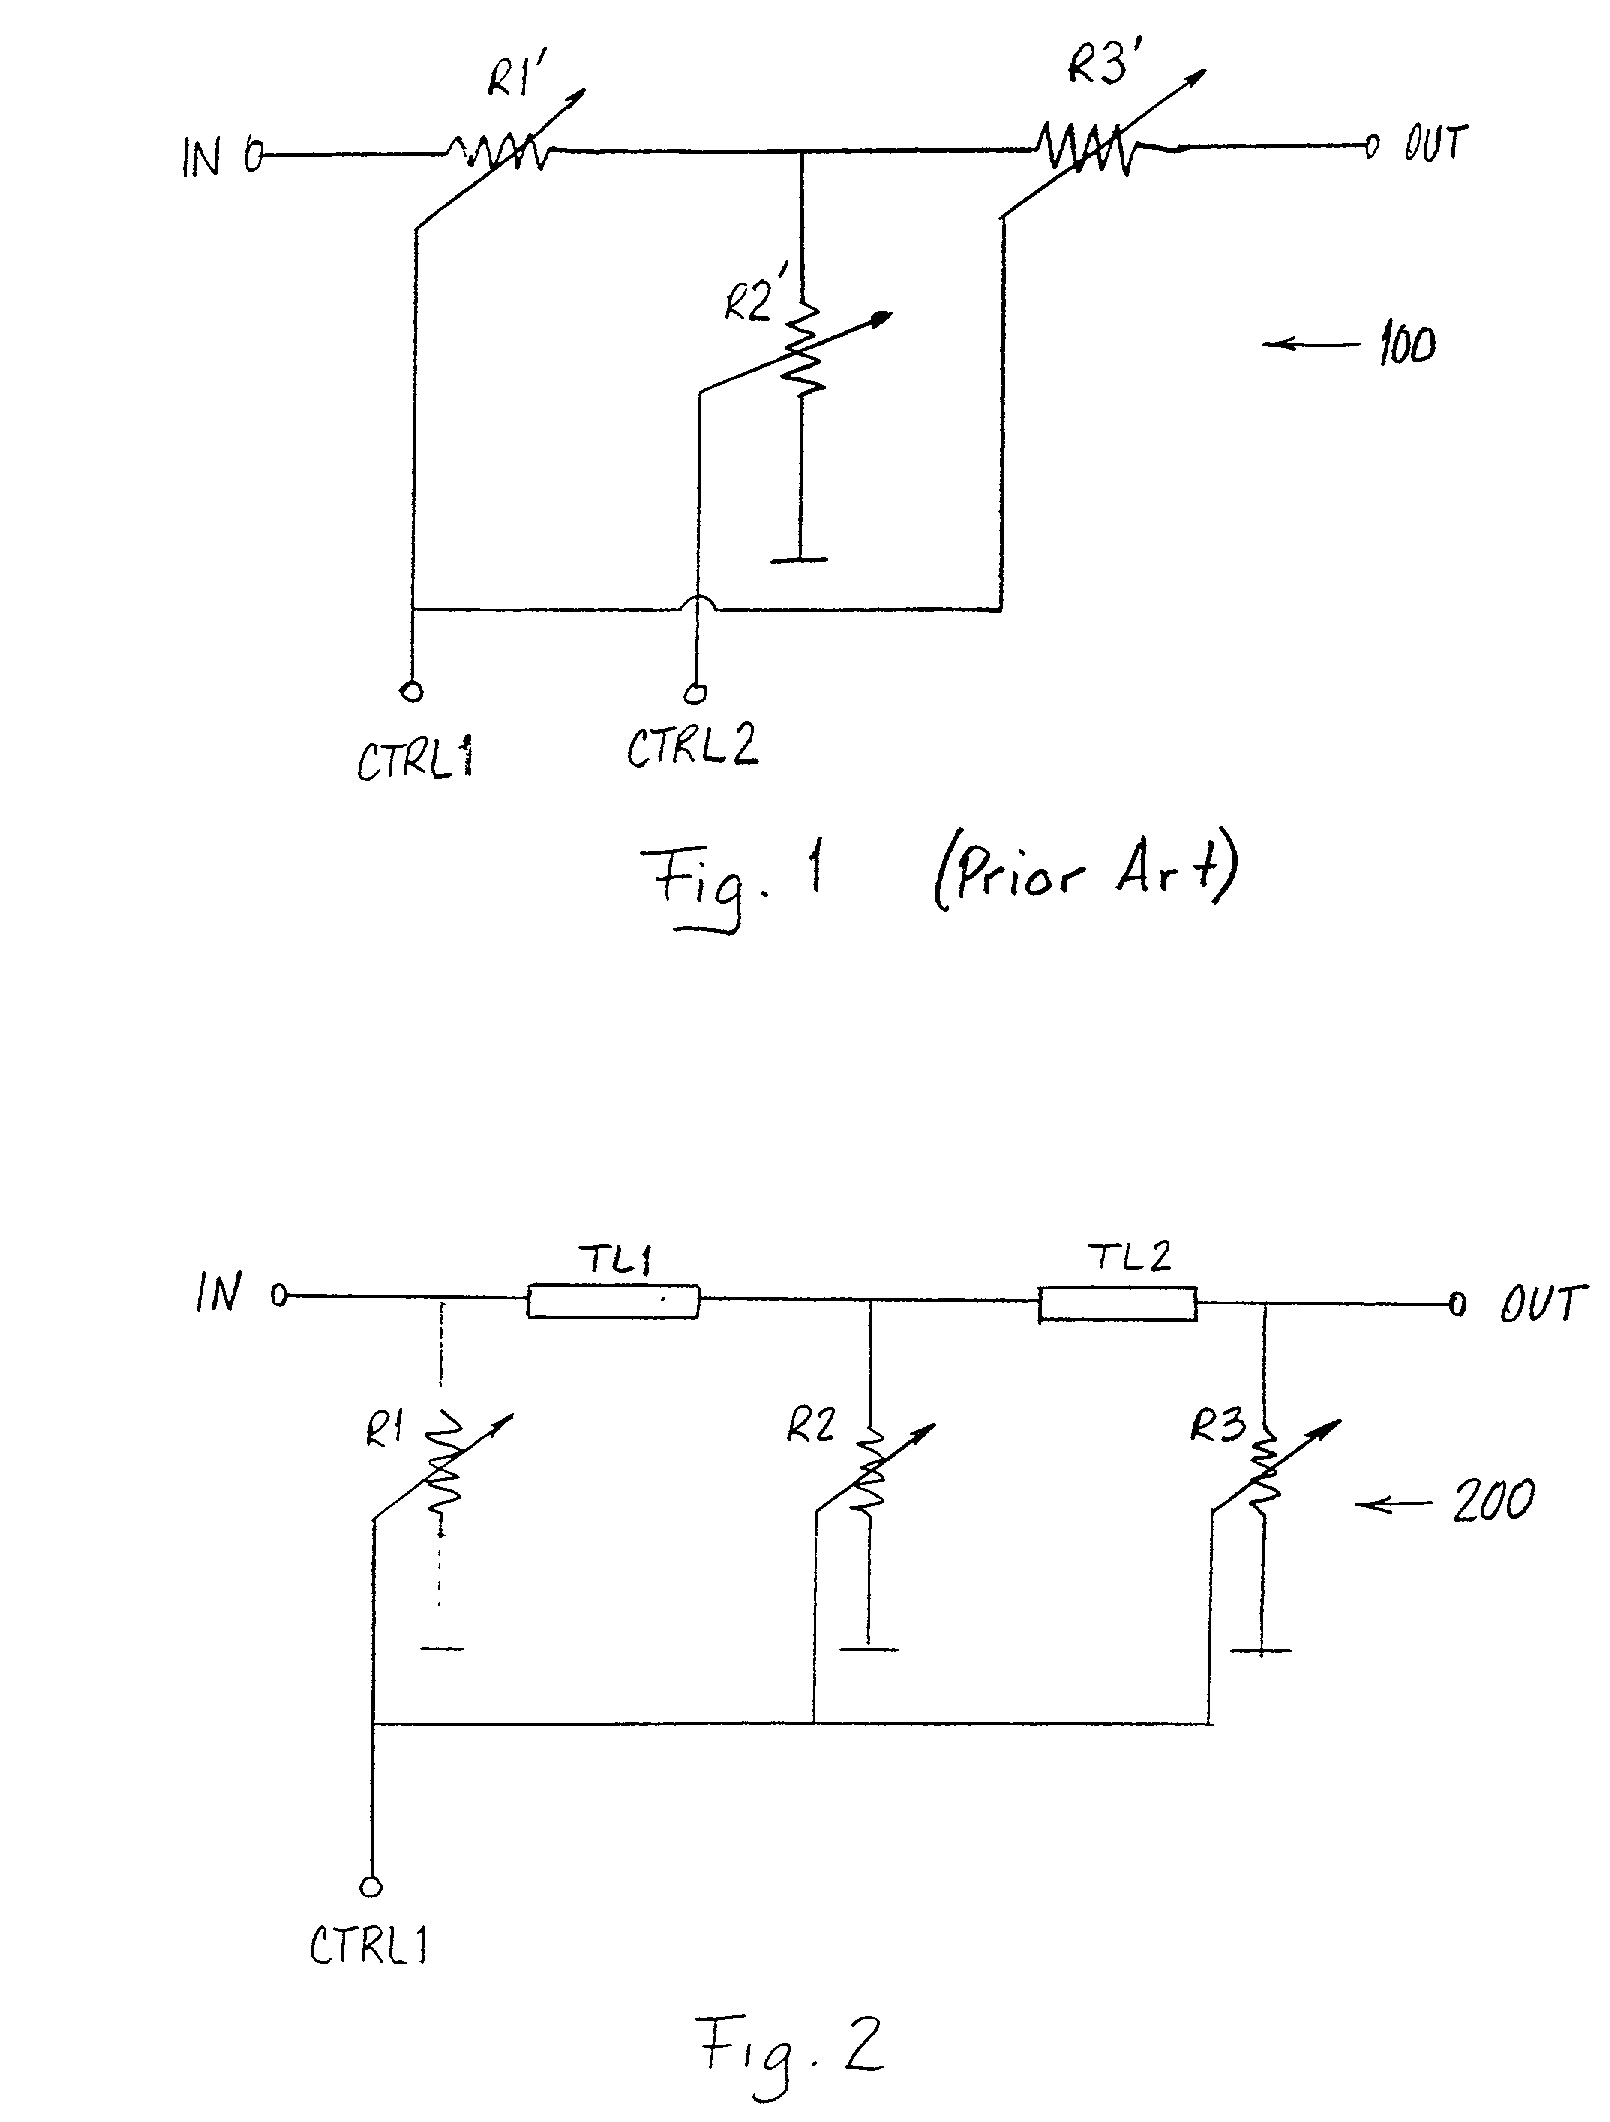 Circuit topology for attenuator and switch circuits